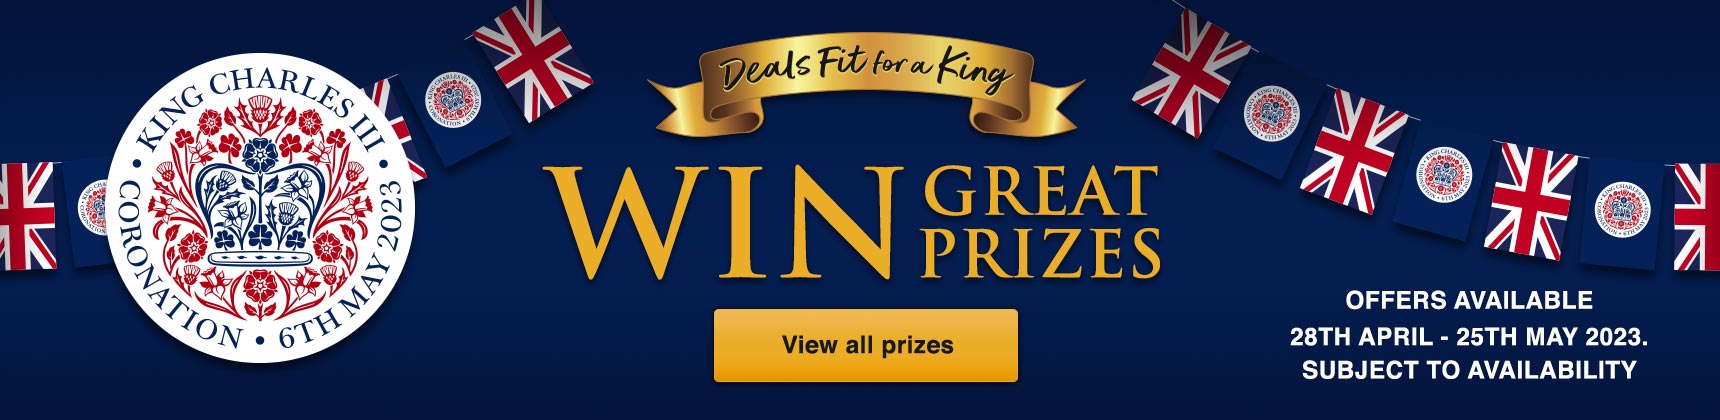 King's Coronation - Win Great Prizes - View all prizes and how to enter